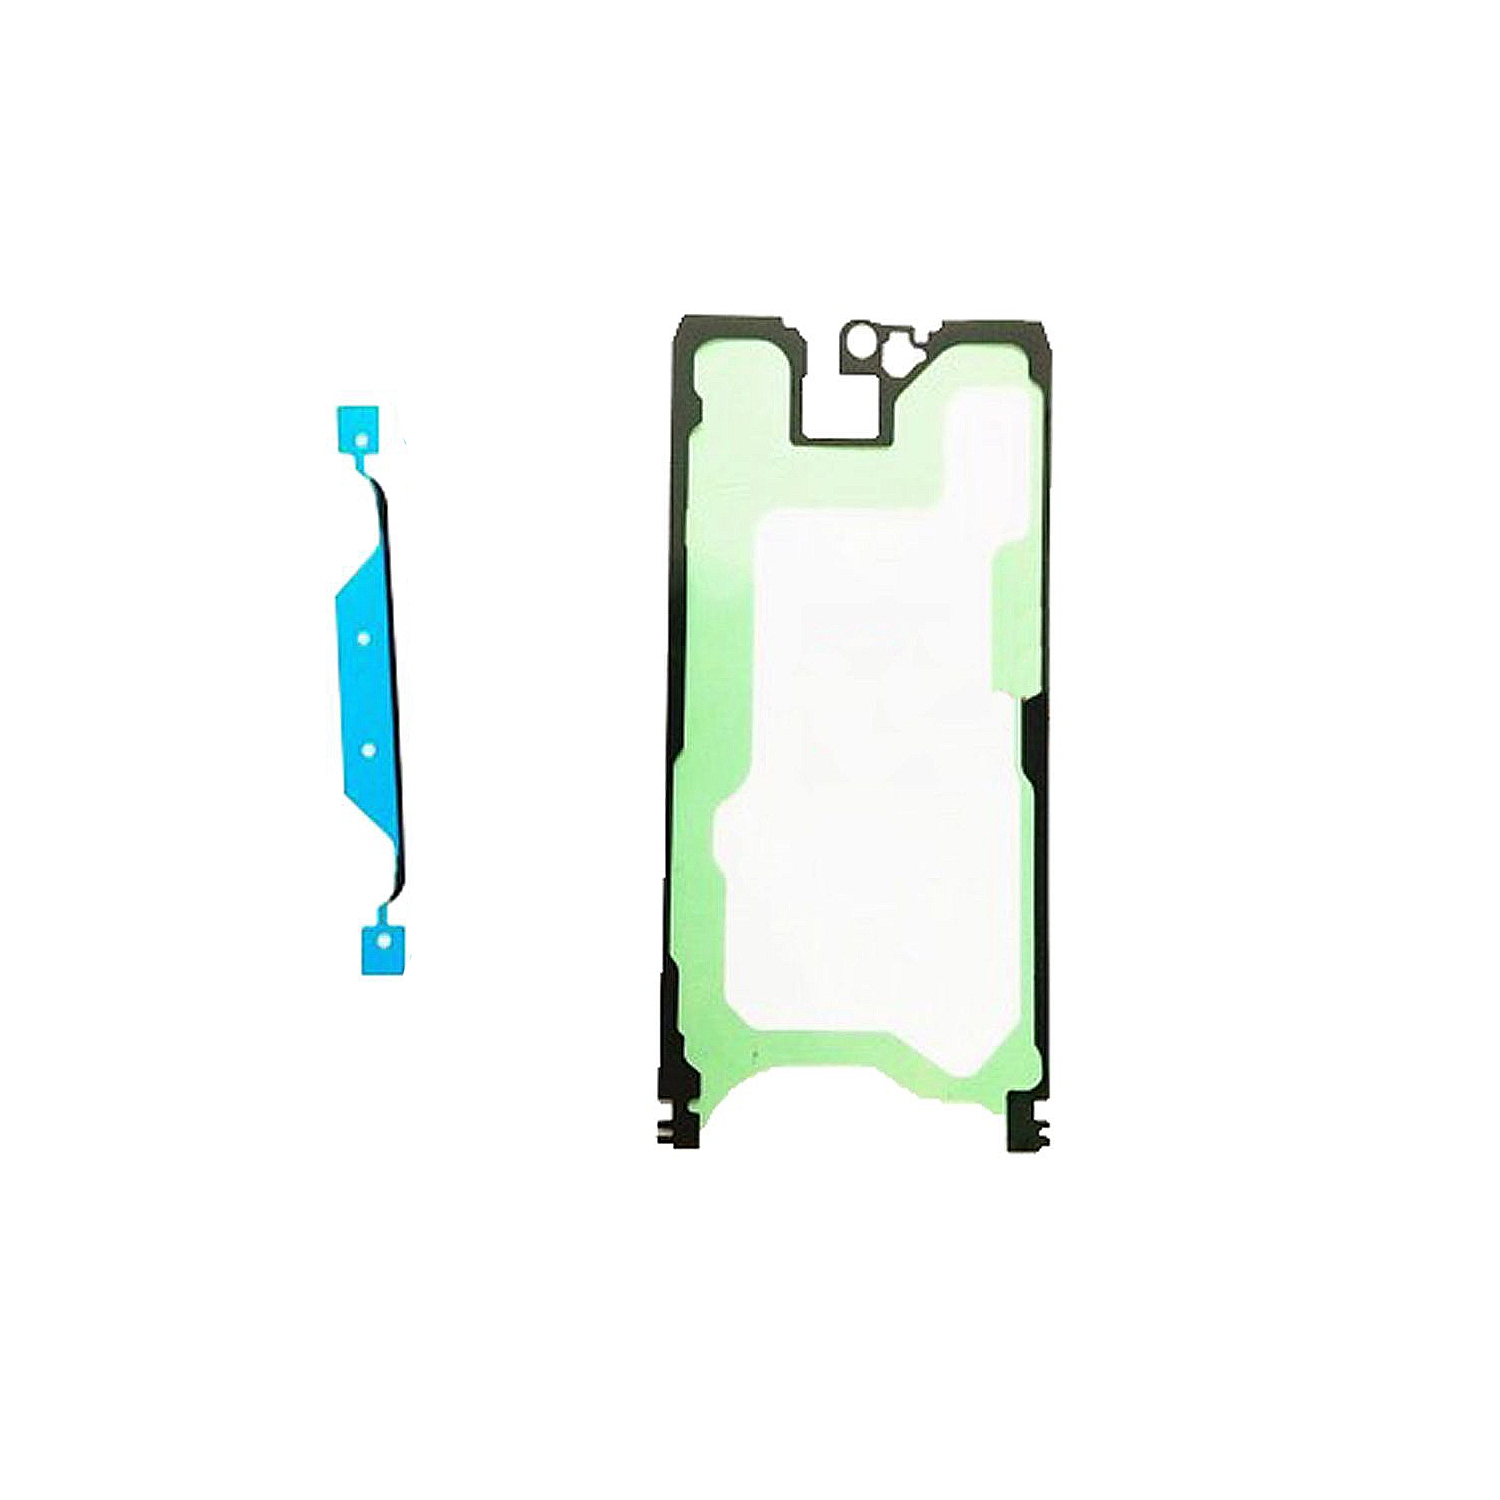 Samsung Galaxy Note 10 Lcd Replacement Screen